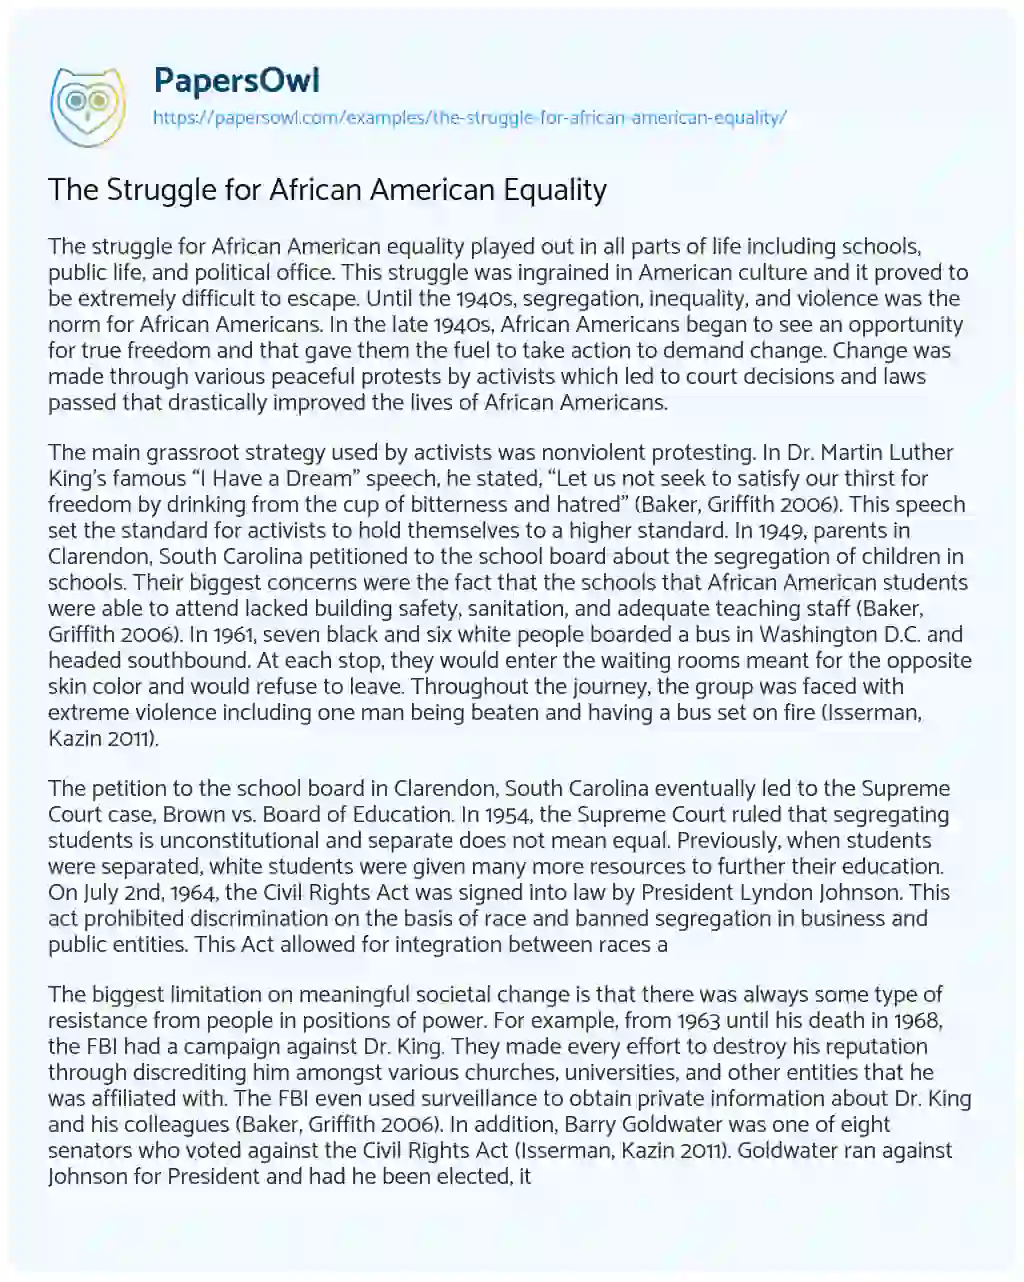 The Struggle for African American Equality essay